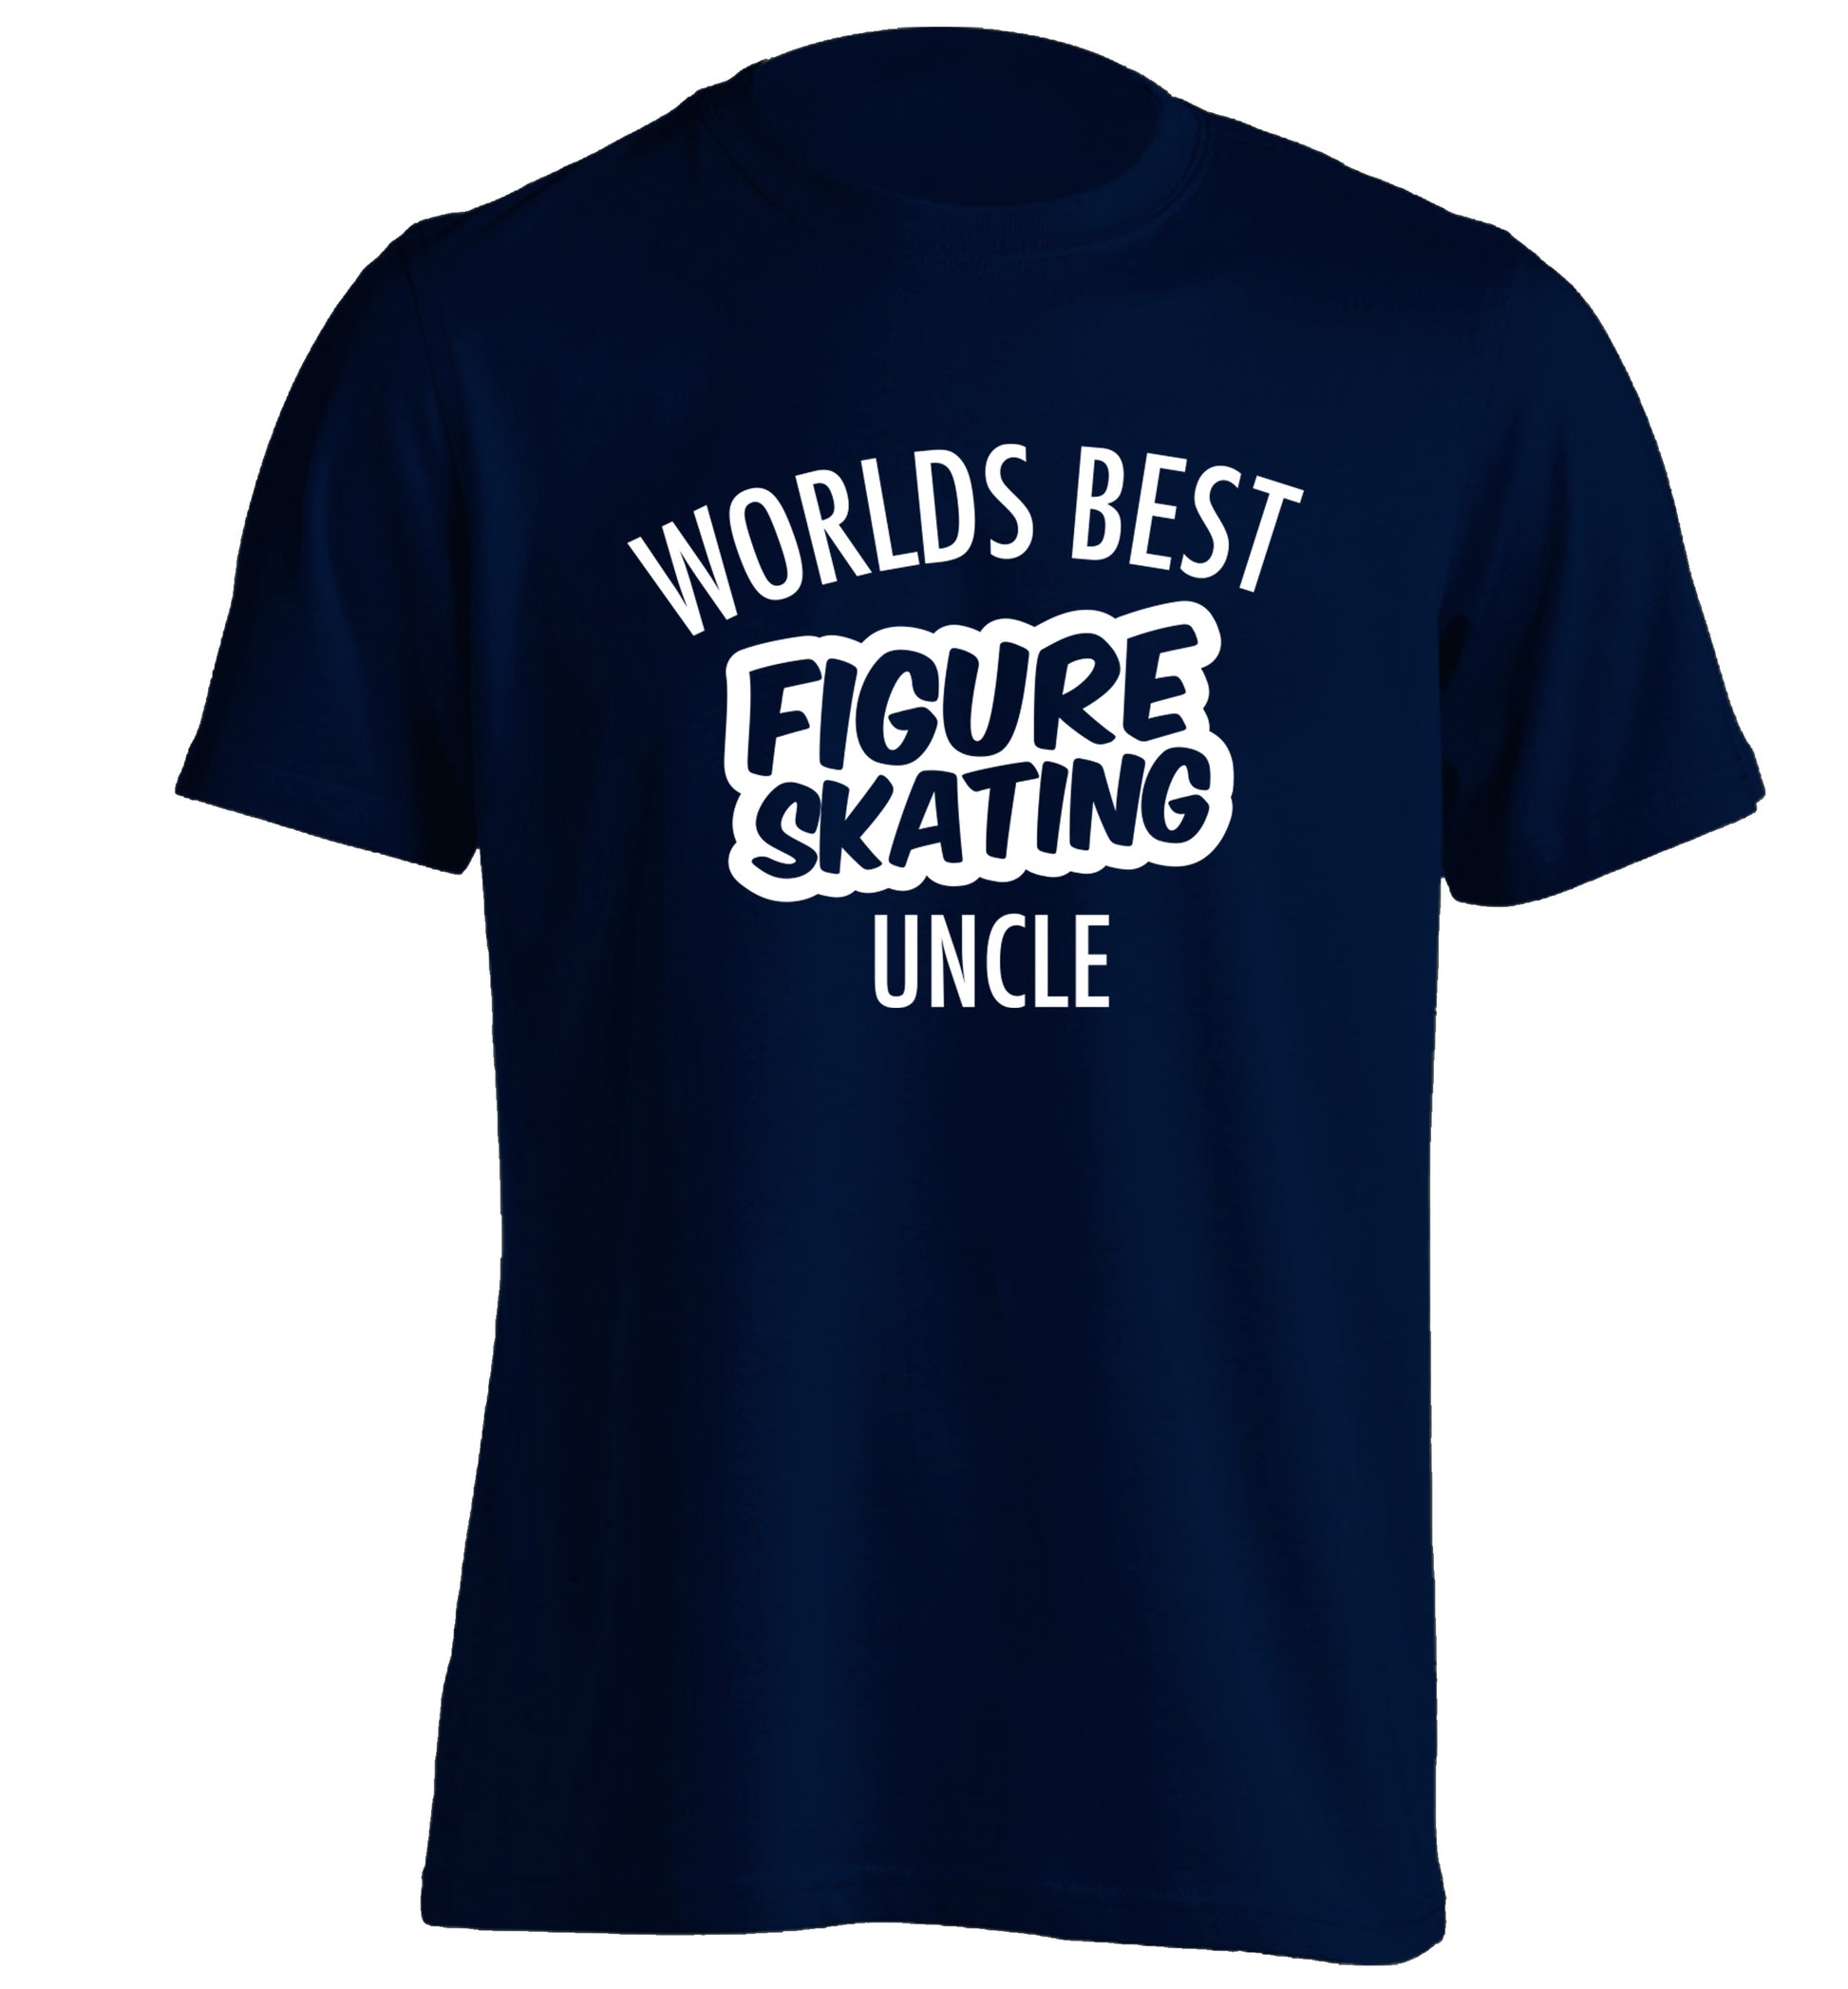 Worlds best figure skating uncle adults unisexnavy Tshirt 2XL